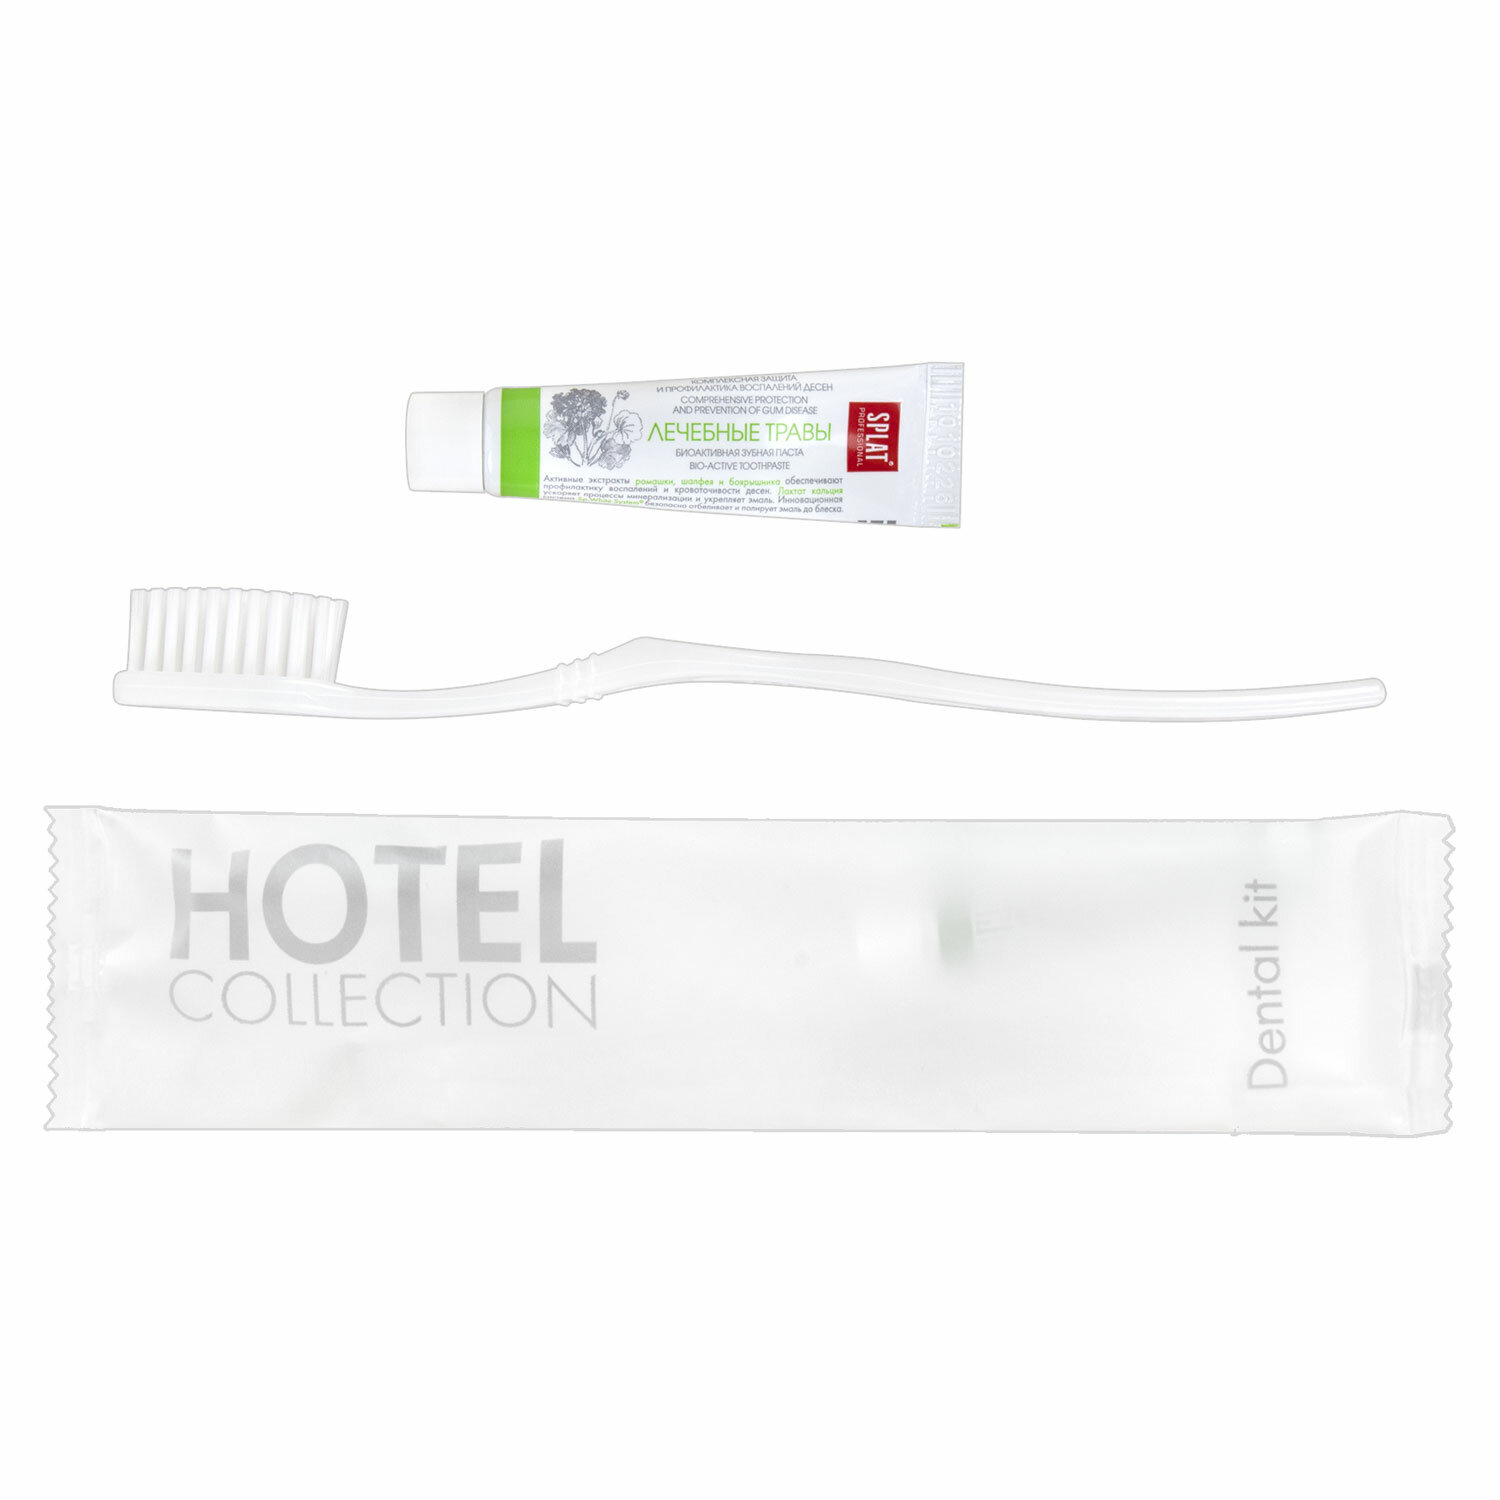  HOTEL COLLECTION 608843